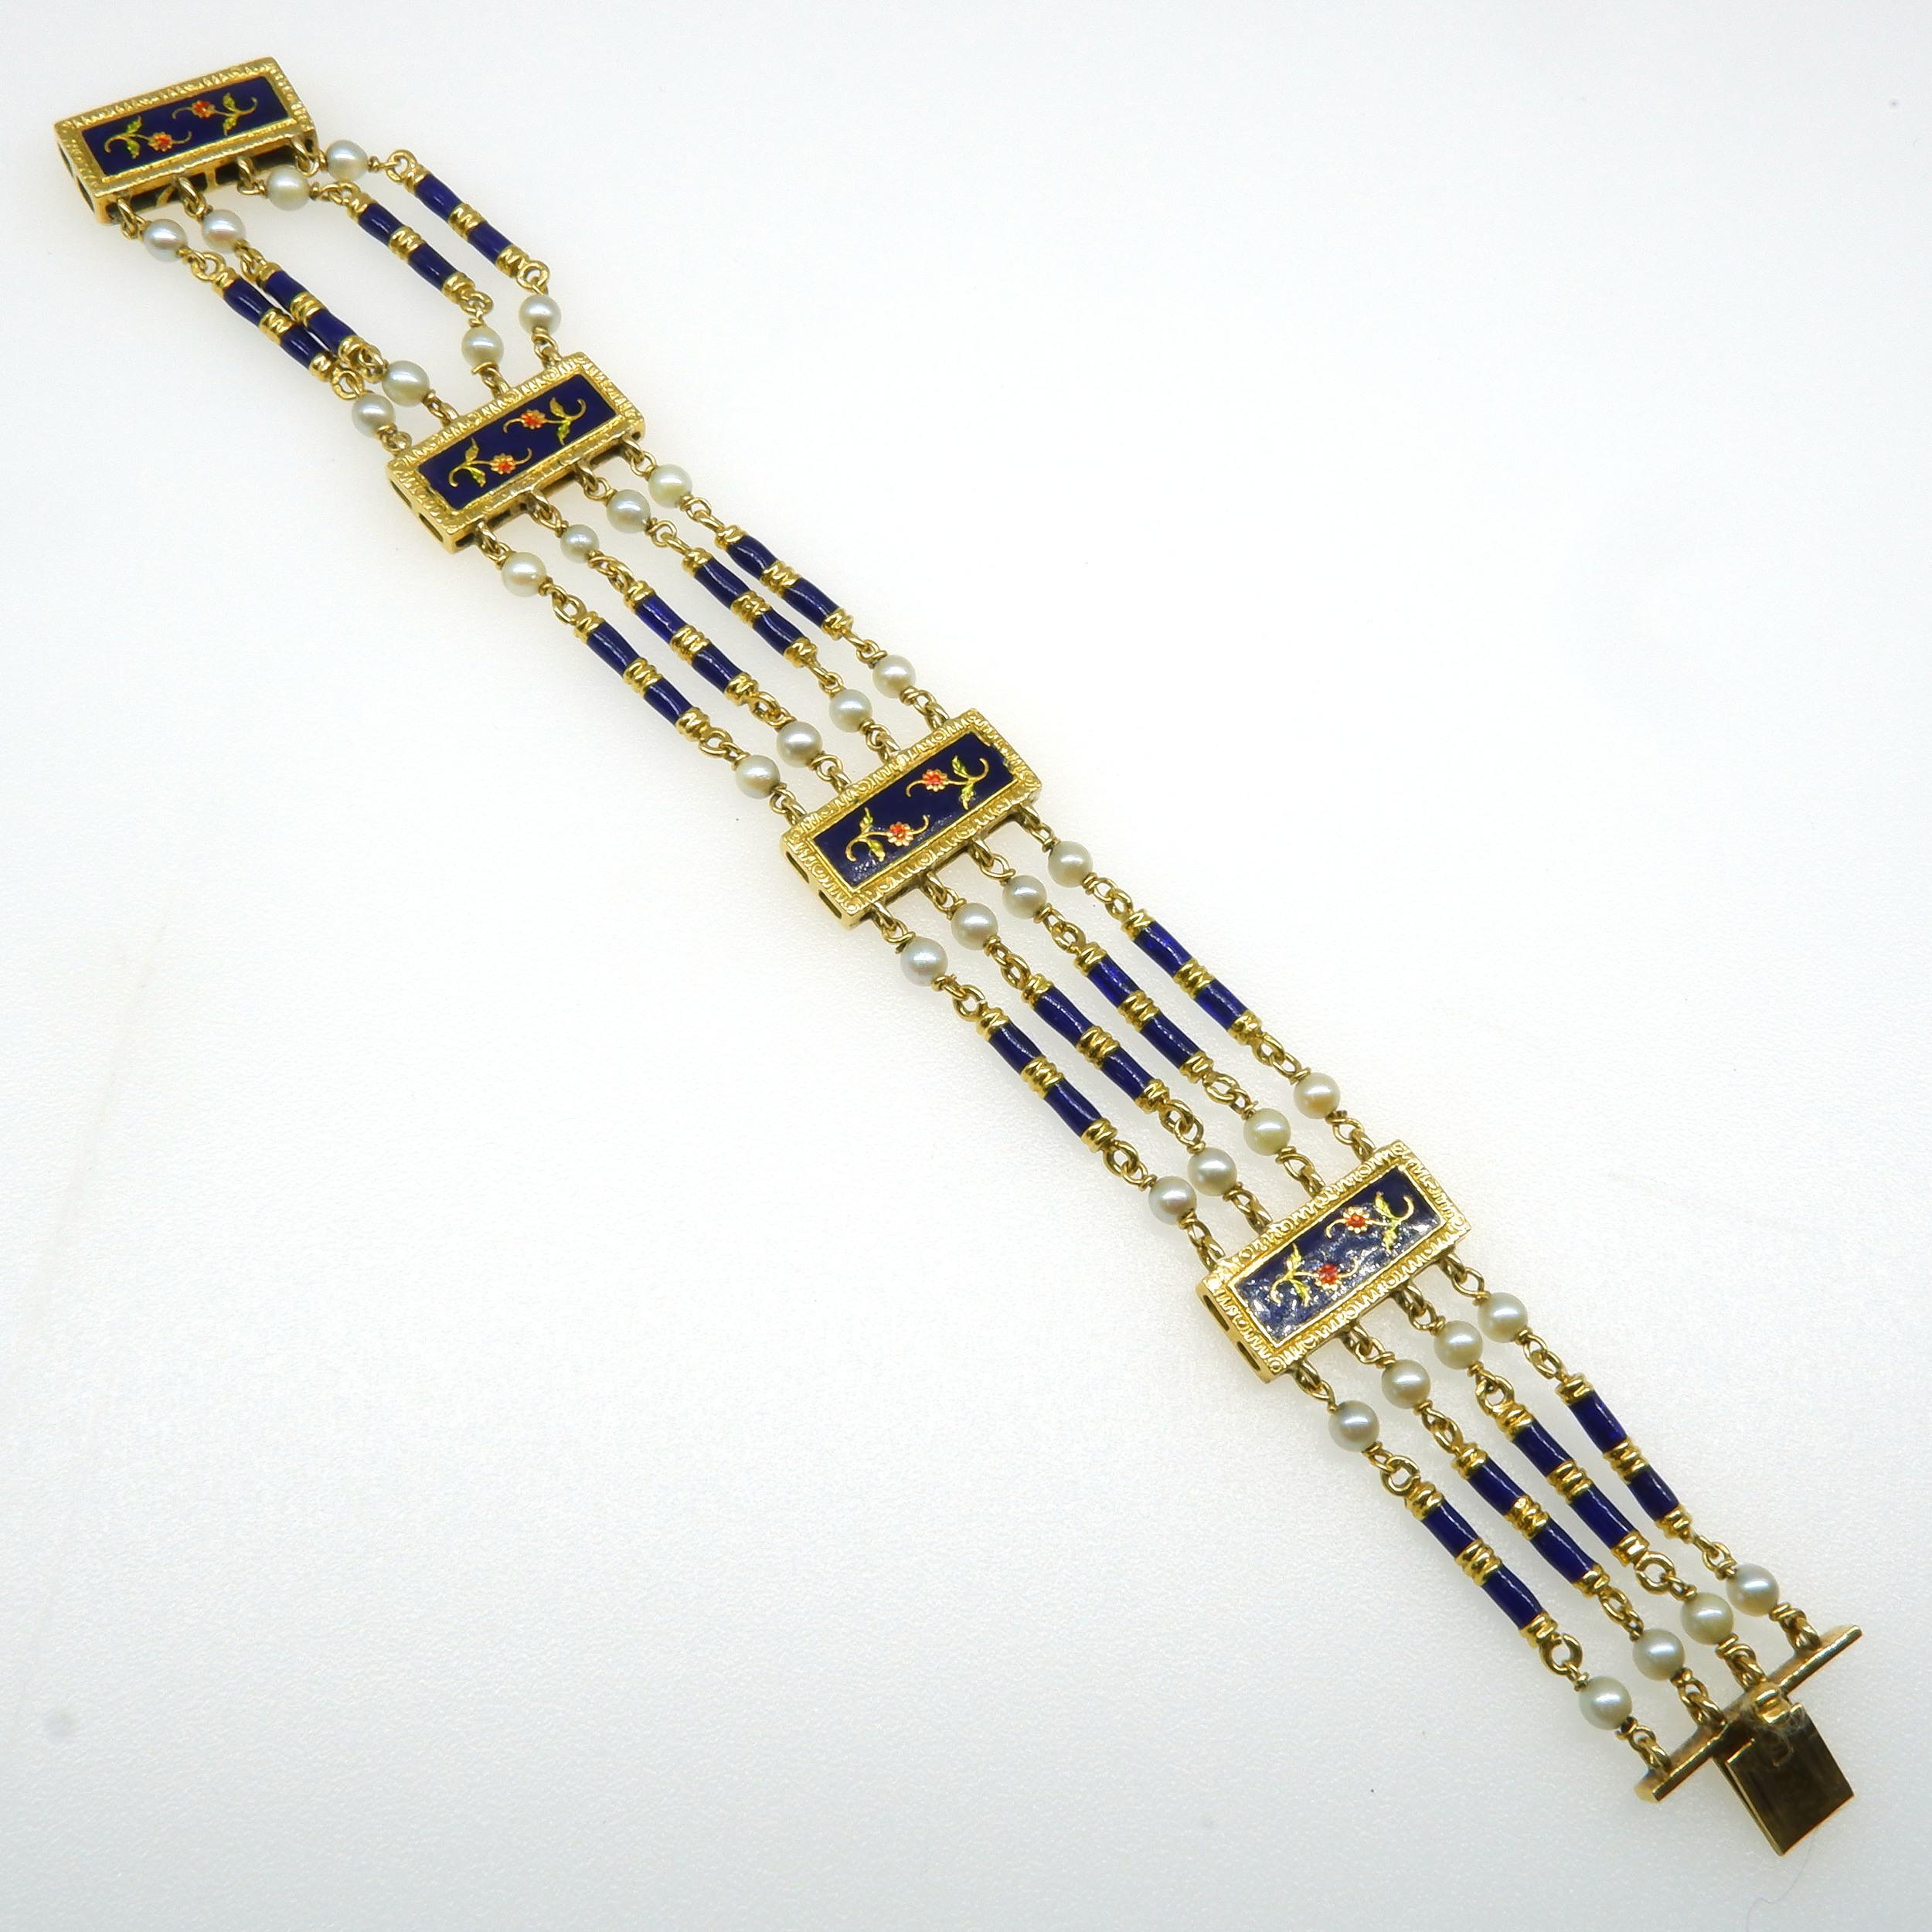 '18ct Yellow Gold Four Row Gatelink Bracelet, Bars with Coloured Enamel Flowers and Blue Enamel Links with a Round Cultured Pearl at Each End'